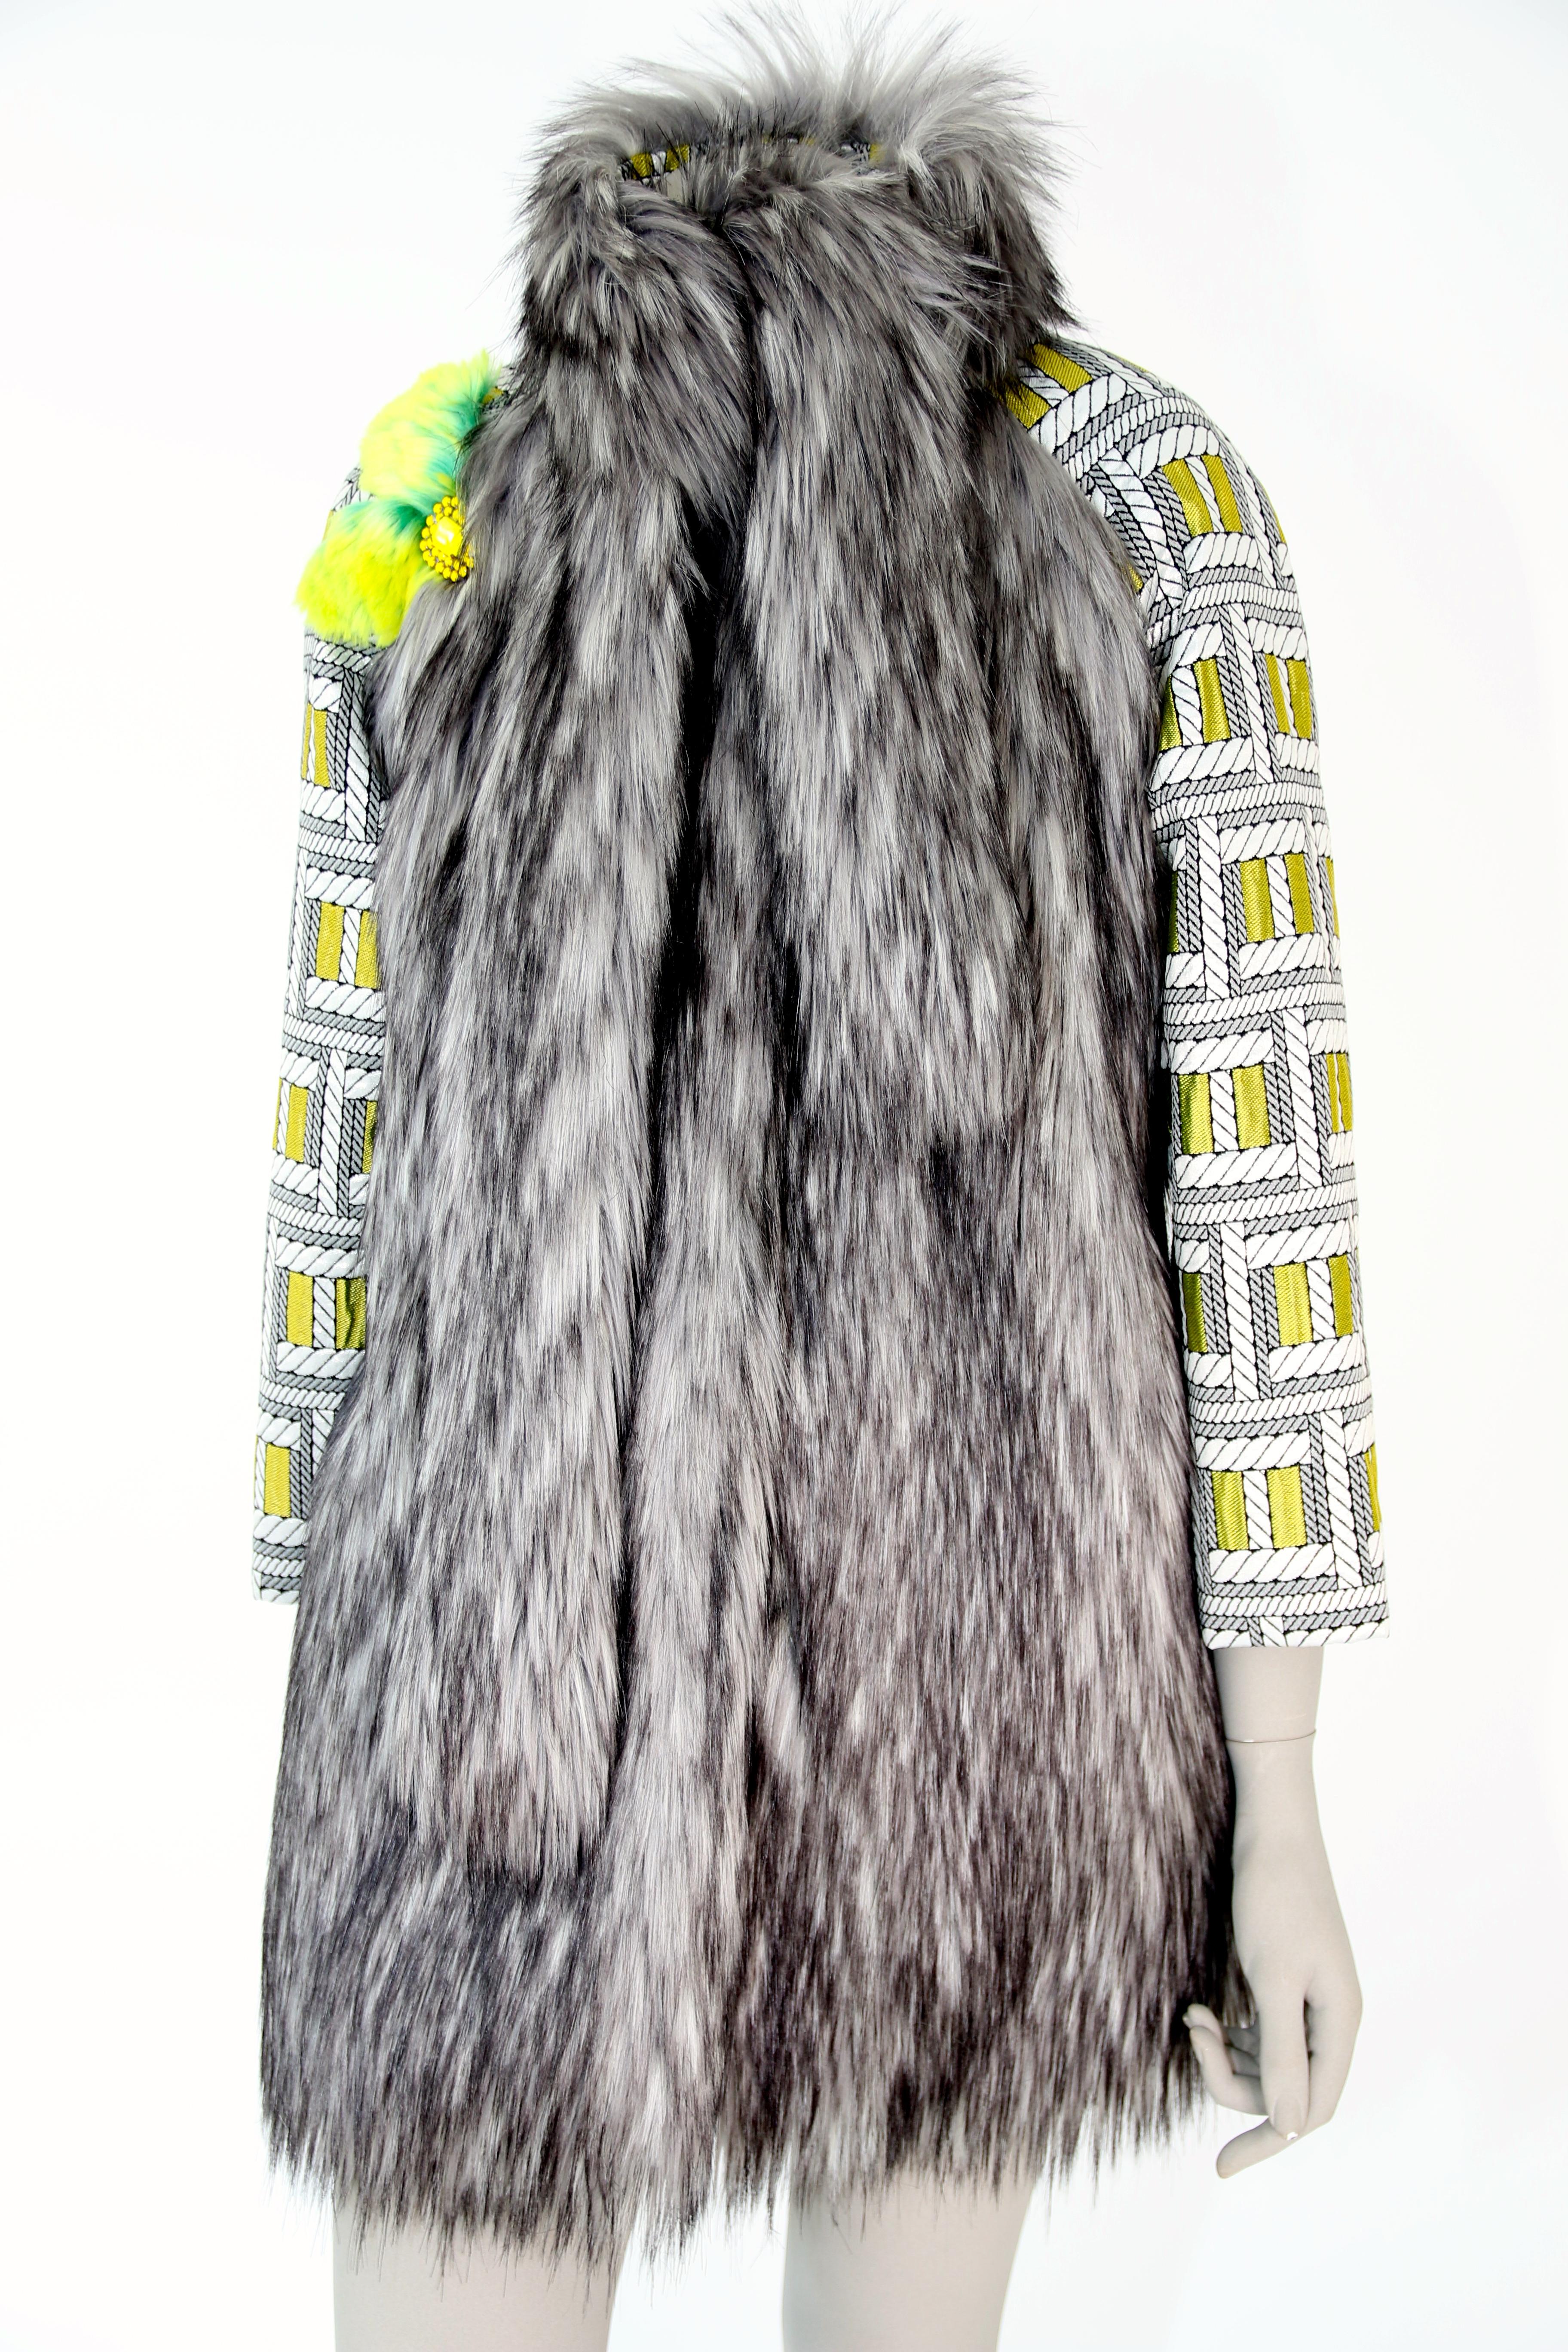 The Lulu Pelush silver gray faux fur fox jacket with brocade sleeves is a one of a kind exclusive piece. Featuring the highest quality man made pelage this unique fur free jacket is a beautiful replica of the long hair silver fox fur. Soft and